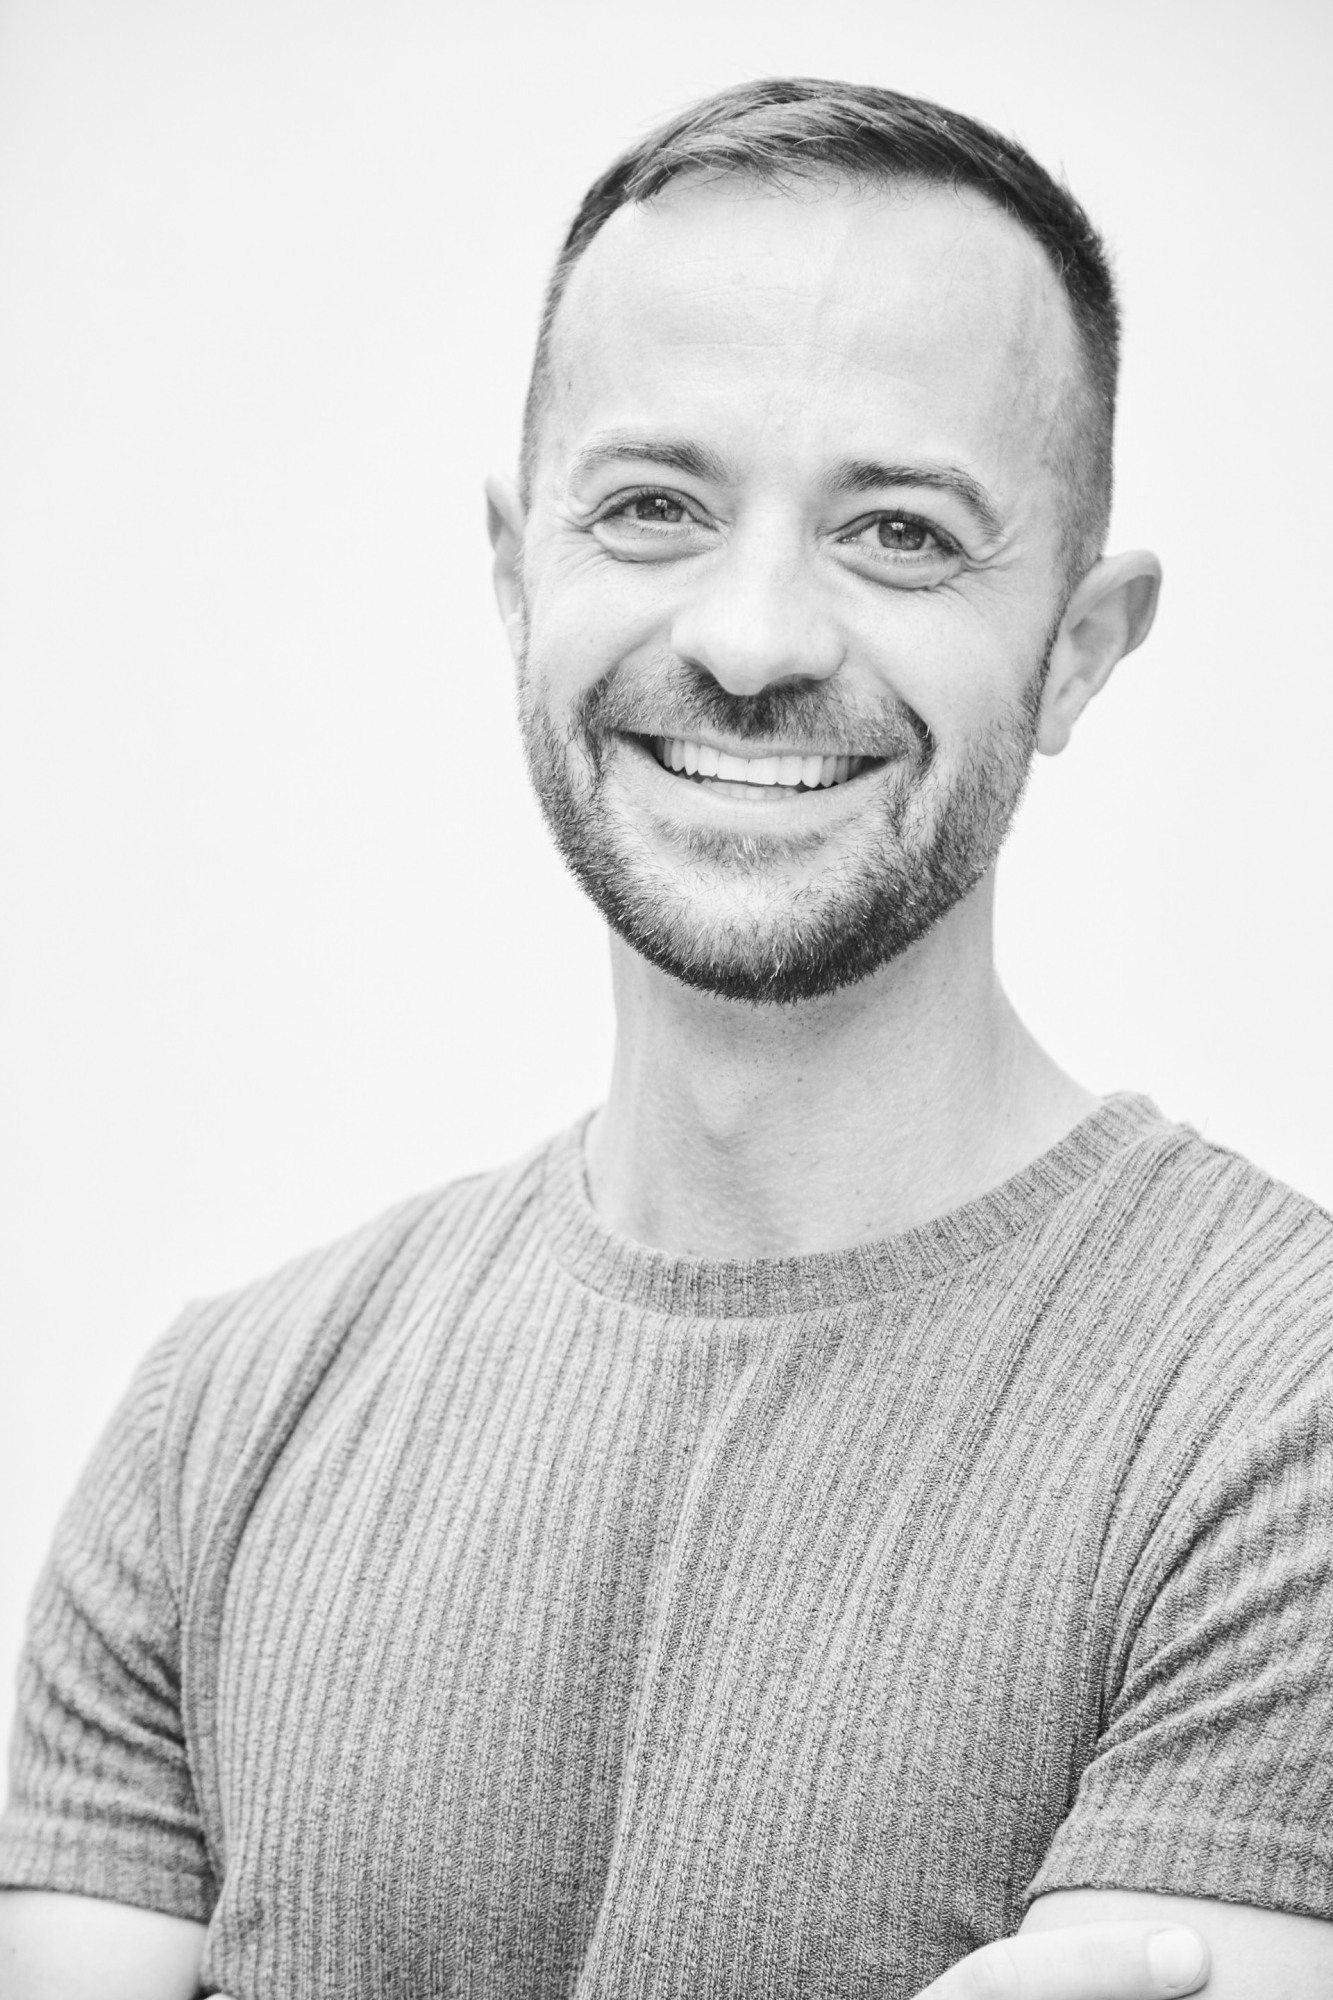 Black and white image of Wilfredo Giordano-Perez in a mid-grey short sleeve shirt, smiling. Light grey background.